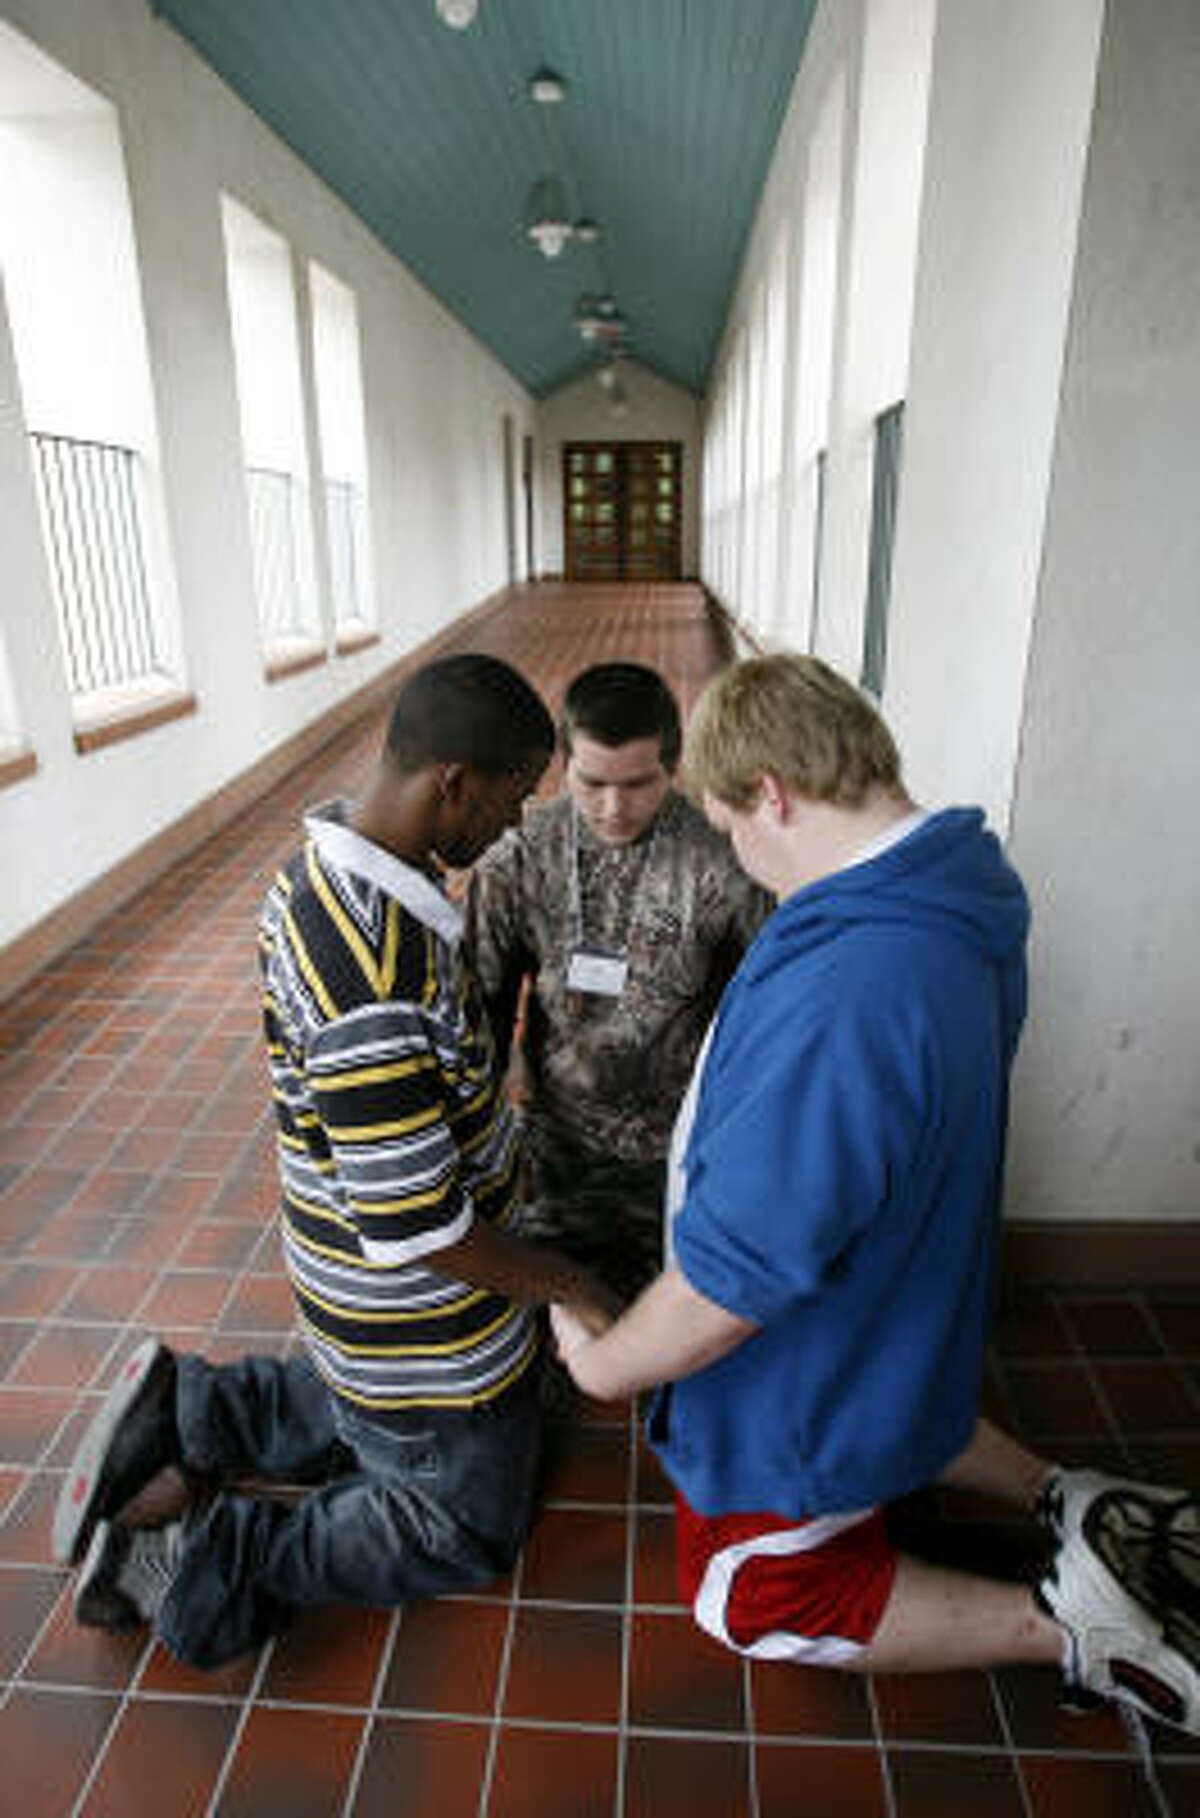 Clay Benton, 18, center, prays with his friends Terrence Payton, 18, left, and Zach Thomas, 17.﻿